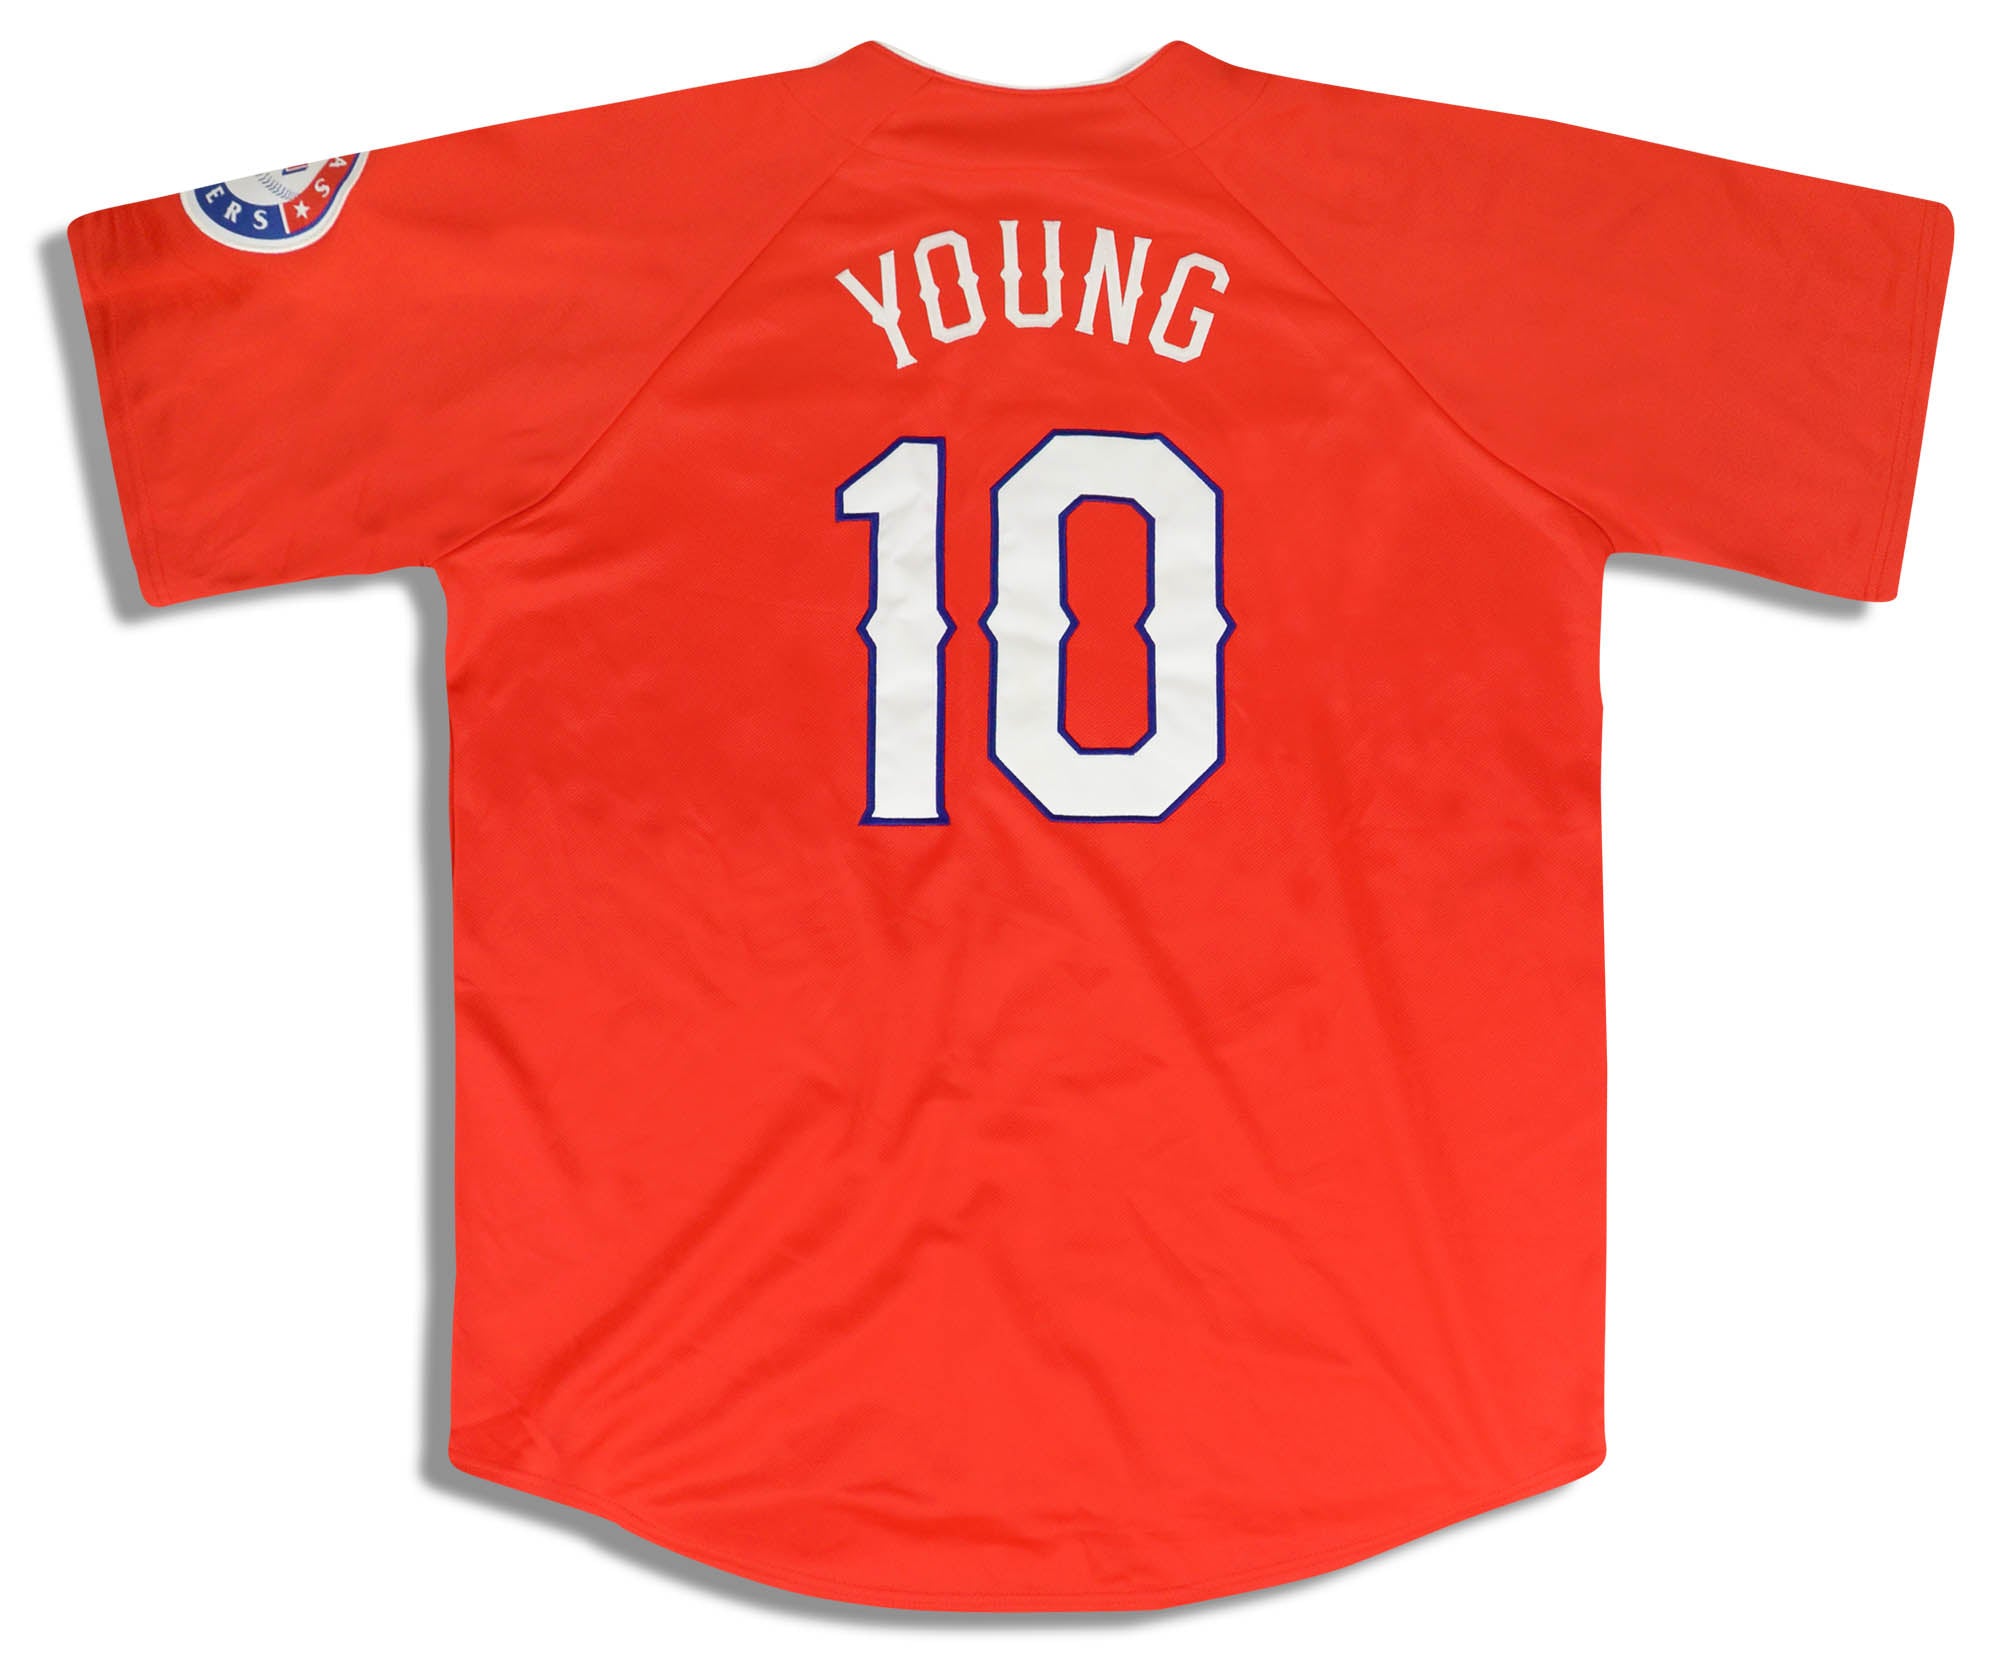 2000's TEXAS RANGERS YOUNG #10 MAJESTIC JERSEY (ALTERNATE) L